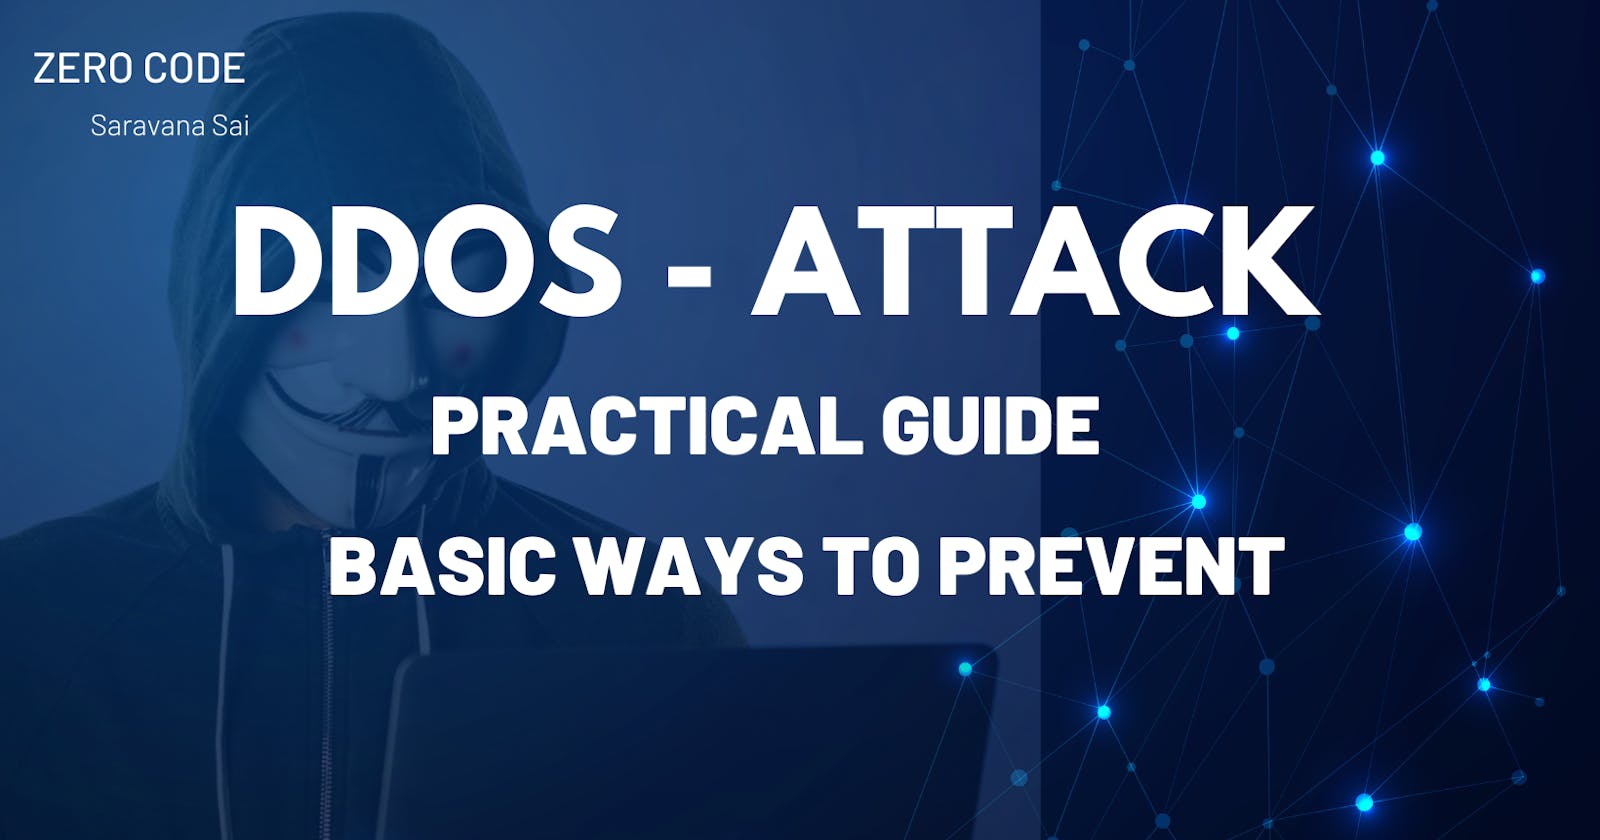 A practical guide for DOS & DDOS attack & ways to prevent your site